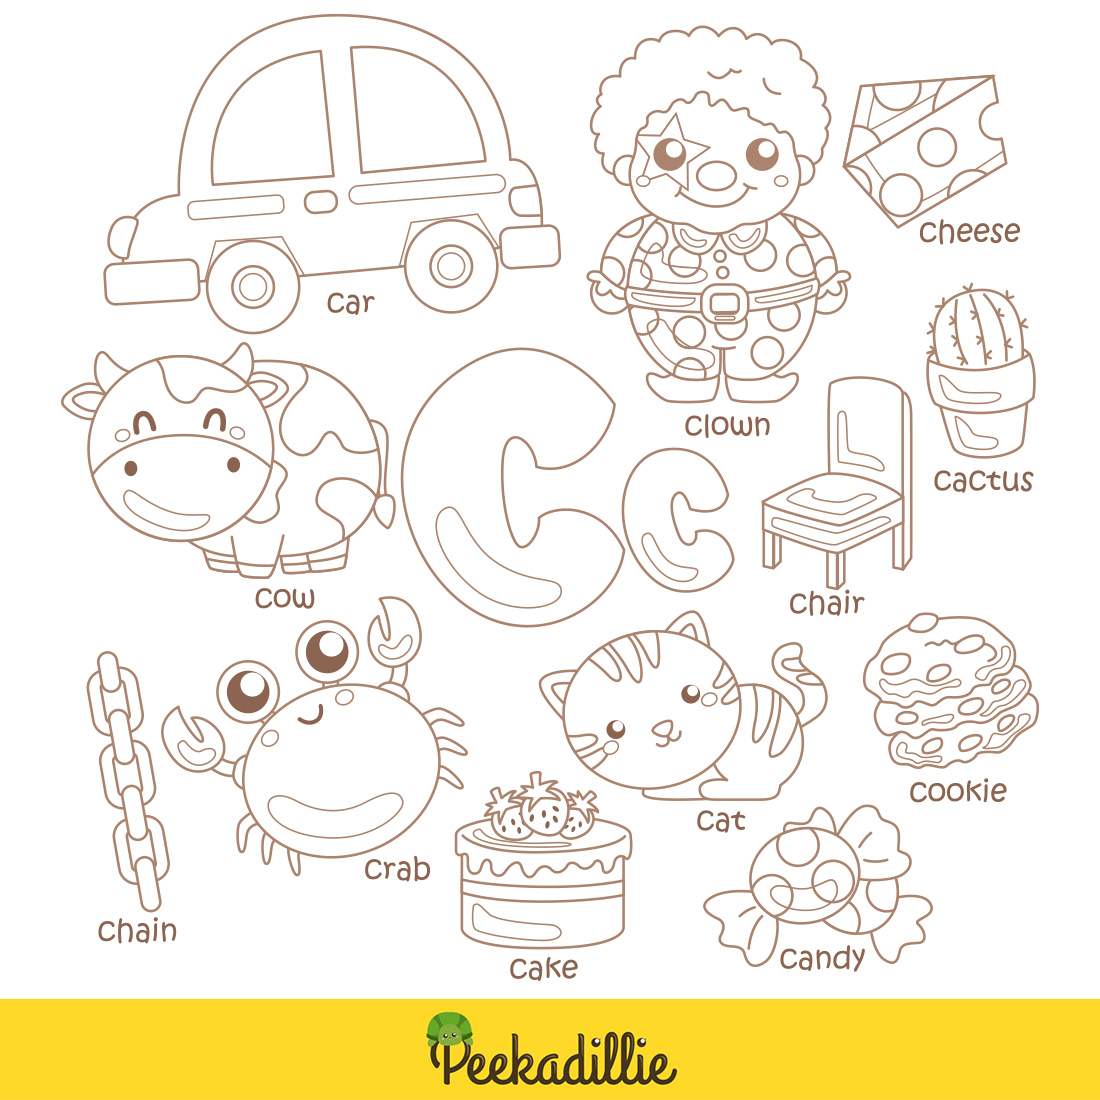 Alphabet C For Vocabulary School Letter Reading Writing Font Study Learning Student Toodler Kids Car Crab Cake Clown Cookie Cow Cactus Cheese Candy Chain Chair Cat Cartoon Digital Stamp Outline preview image.